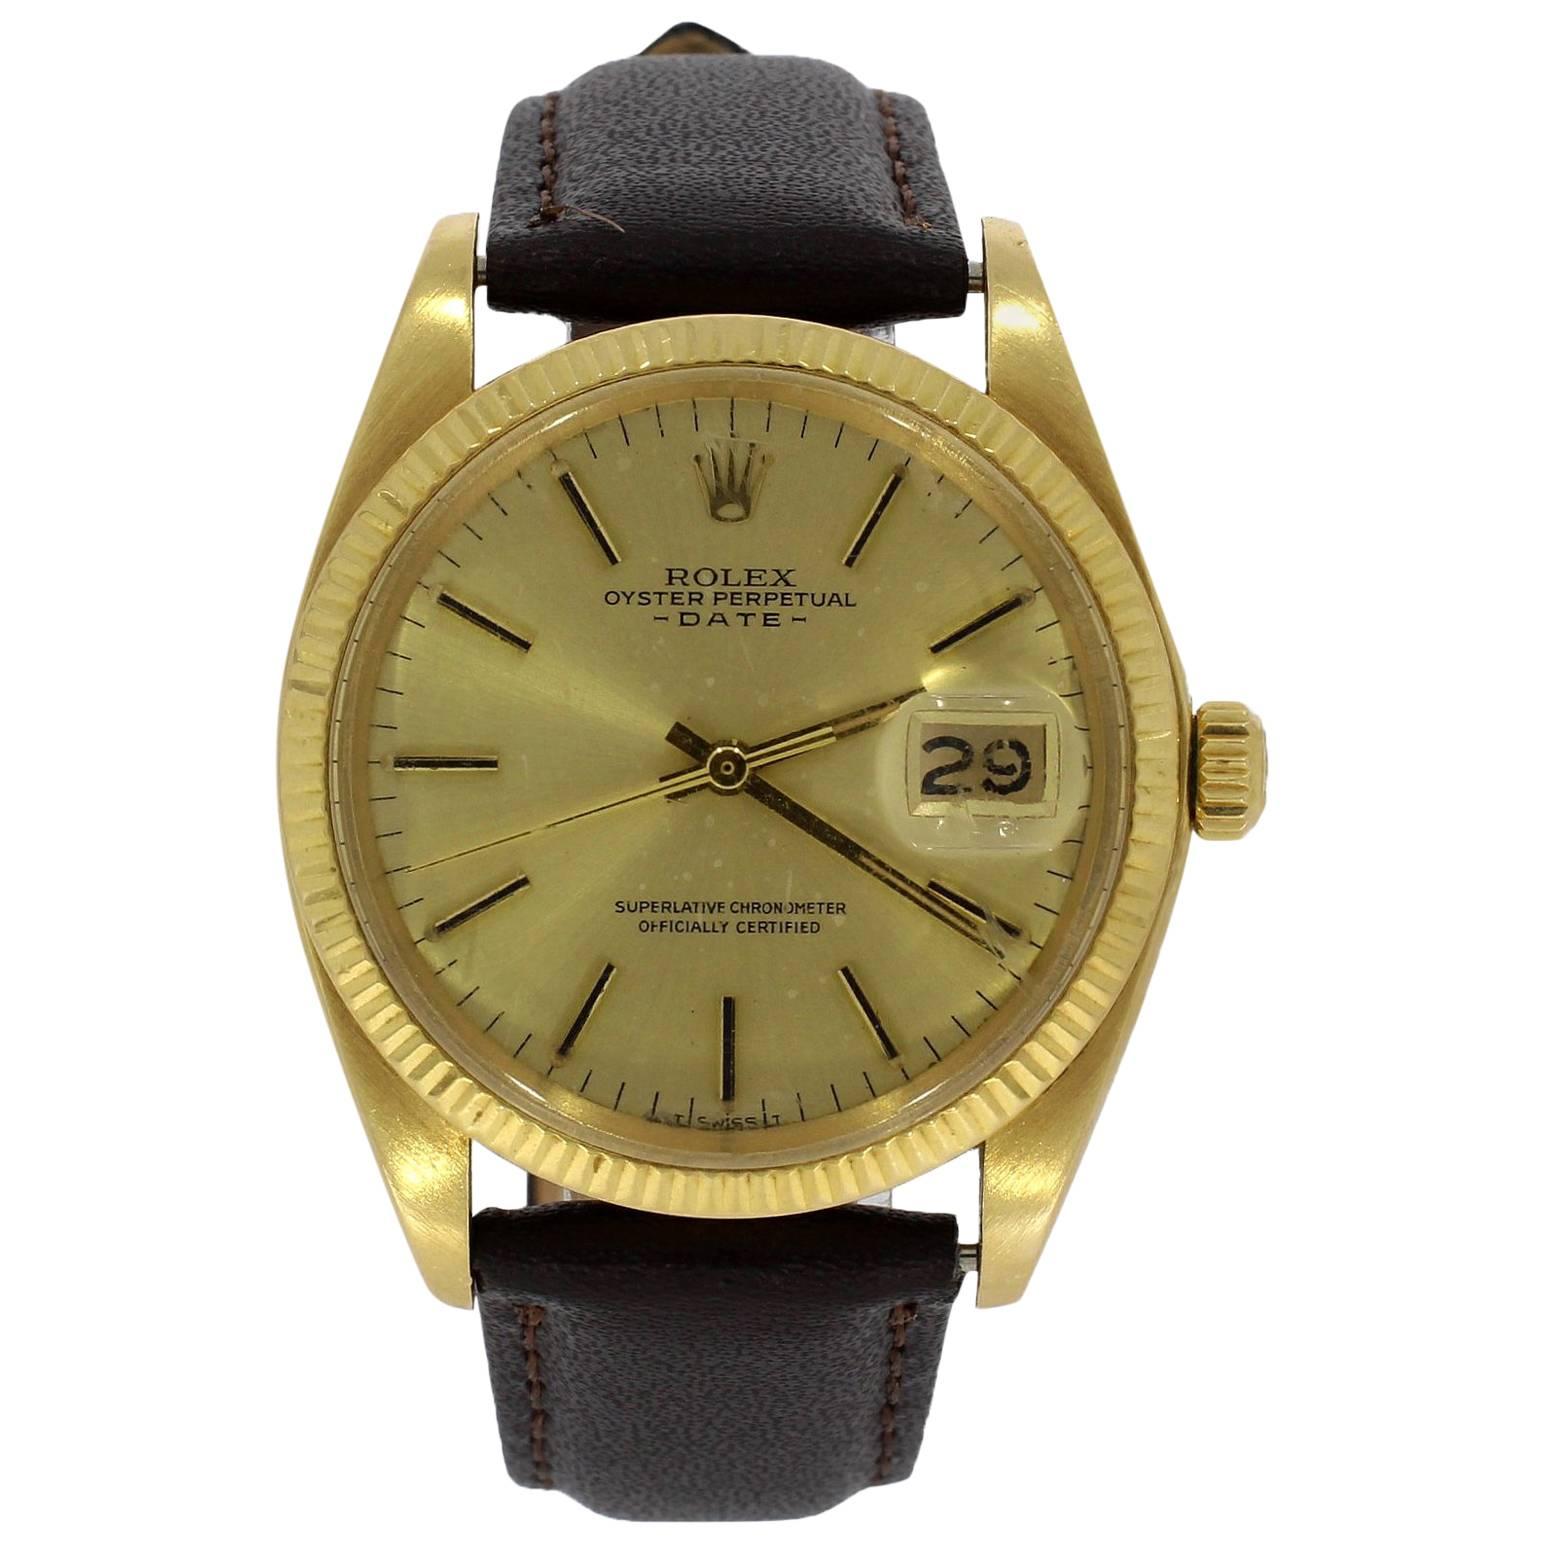 Rolex Yellow Gold Date Calibre 1570 Wristwatch Ref 1503, 1977 For Sale ...